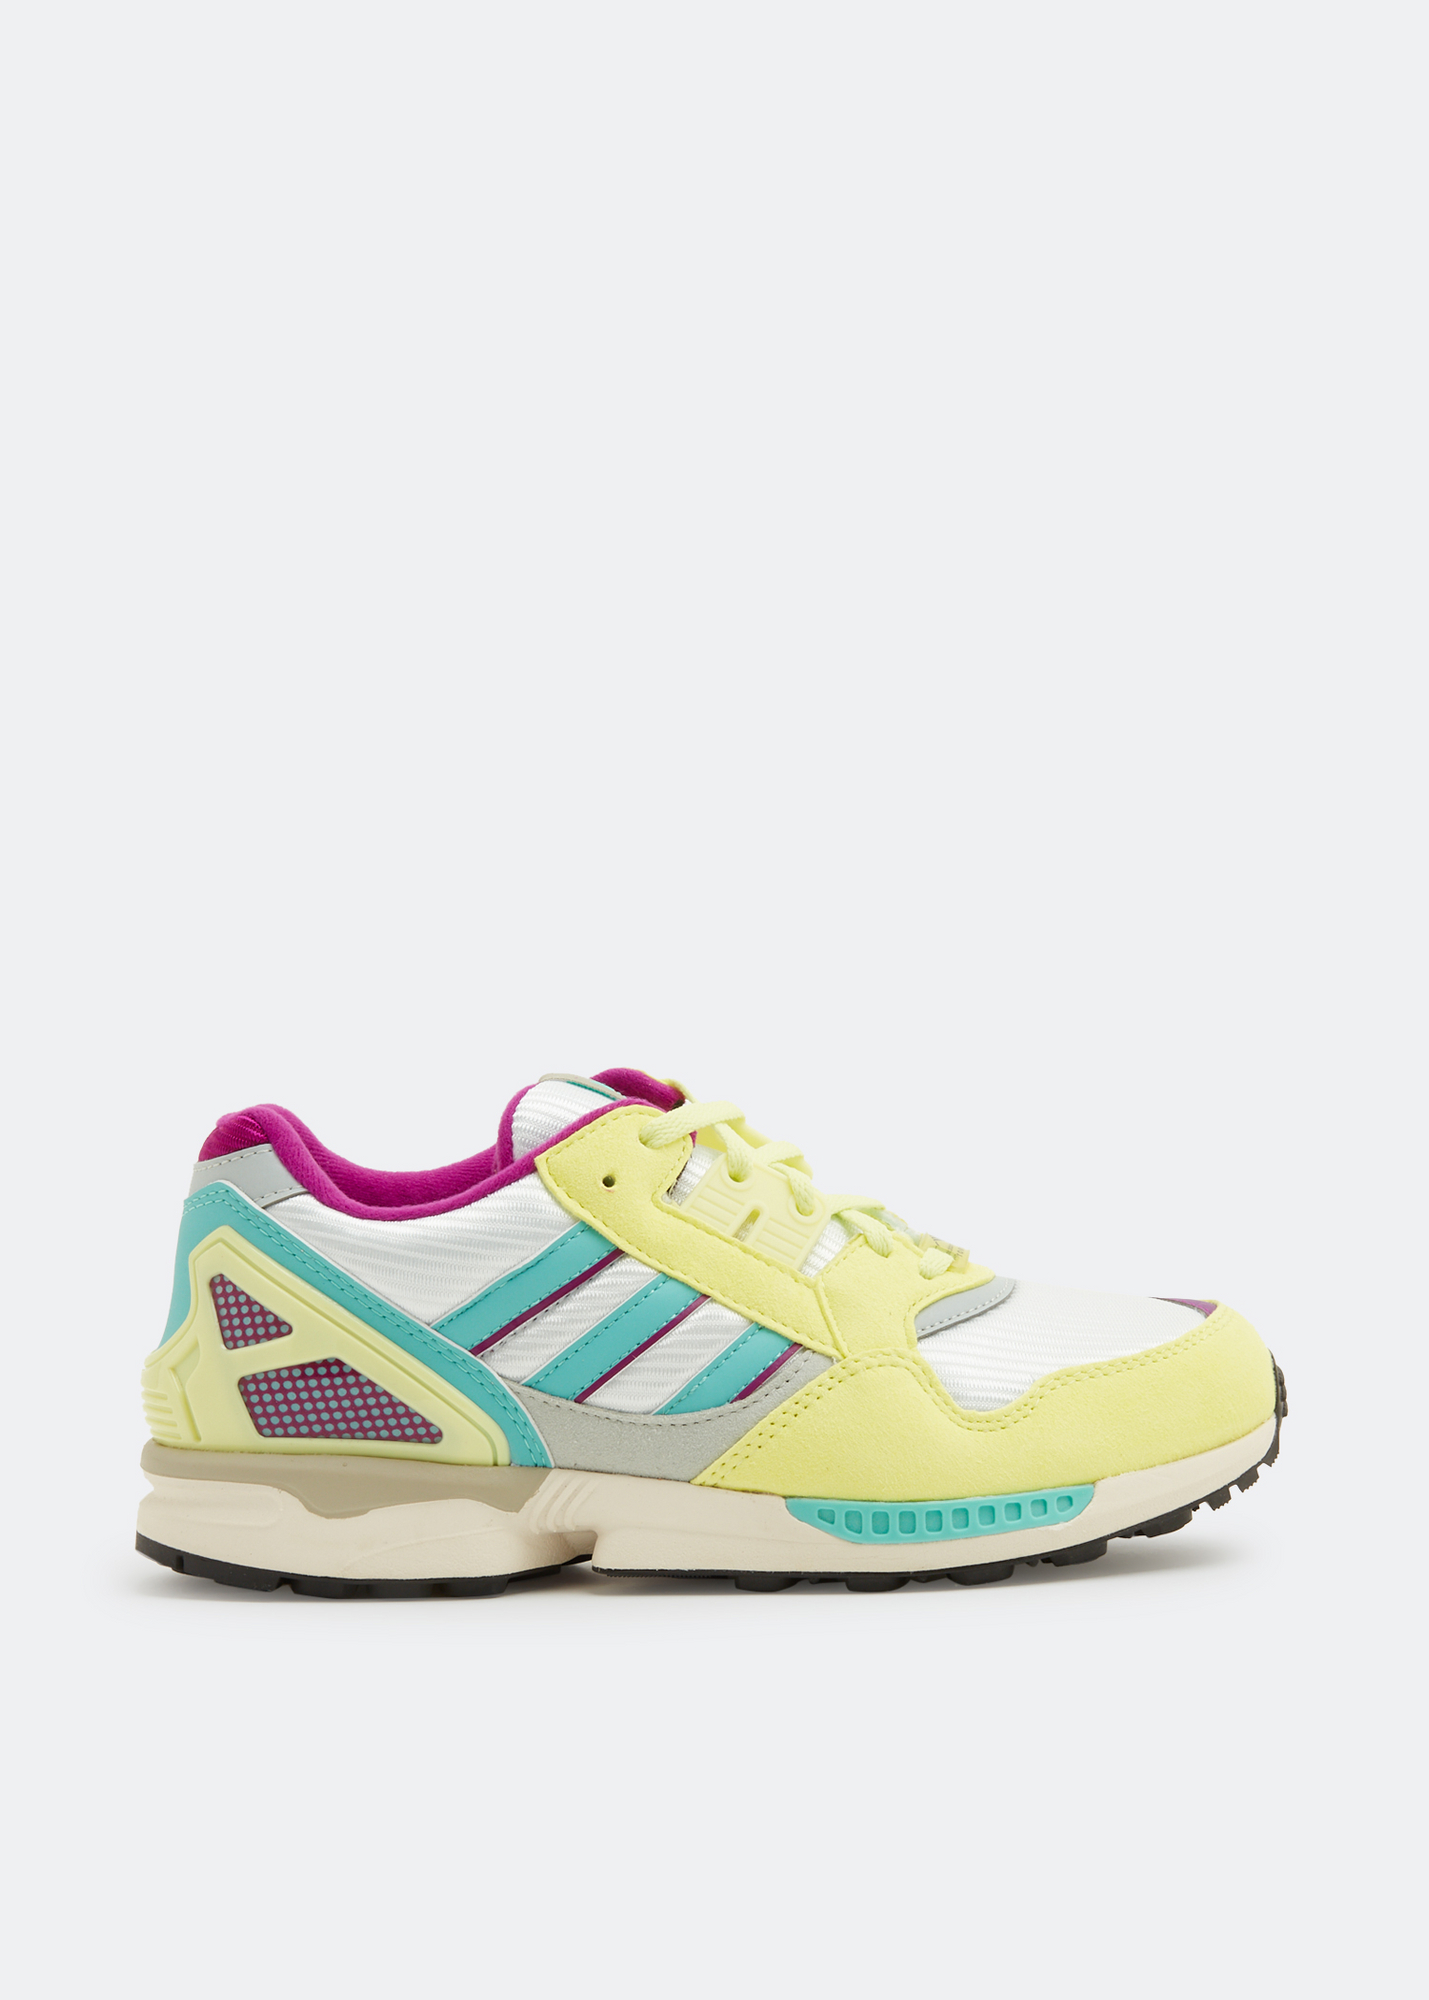 Adidas ZX 9000 sneakers for Men - Multicolored in KSA | Level Shoes